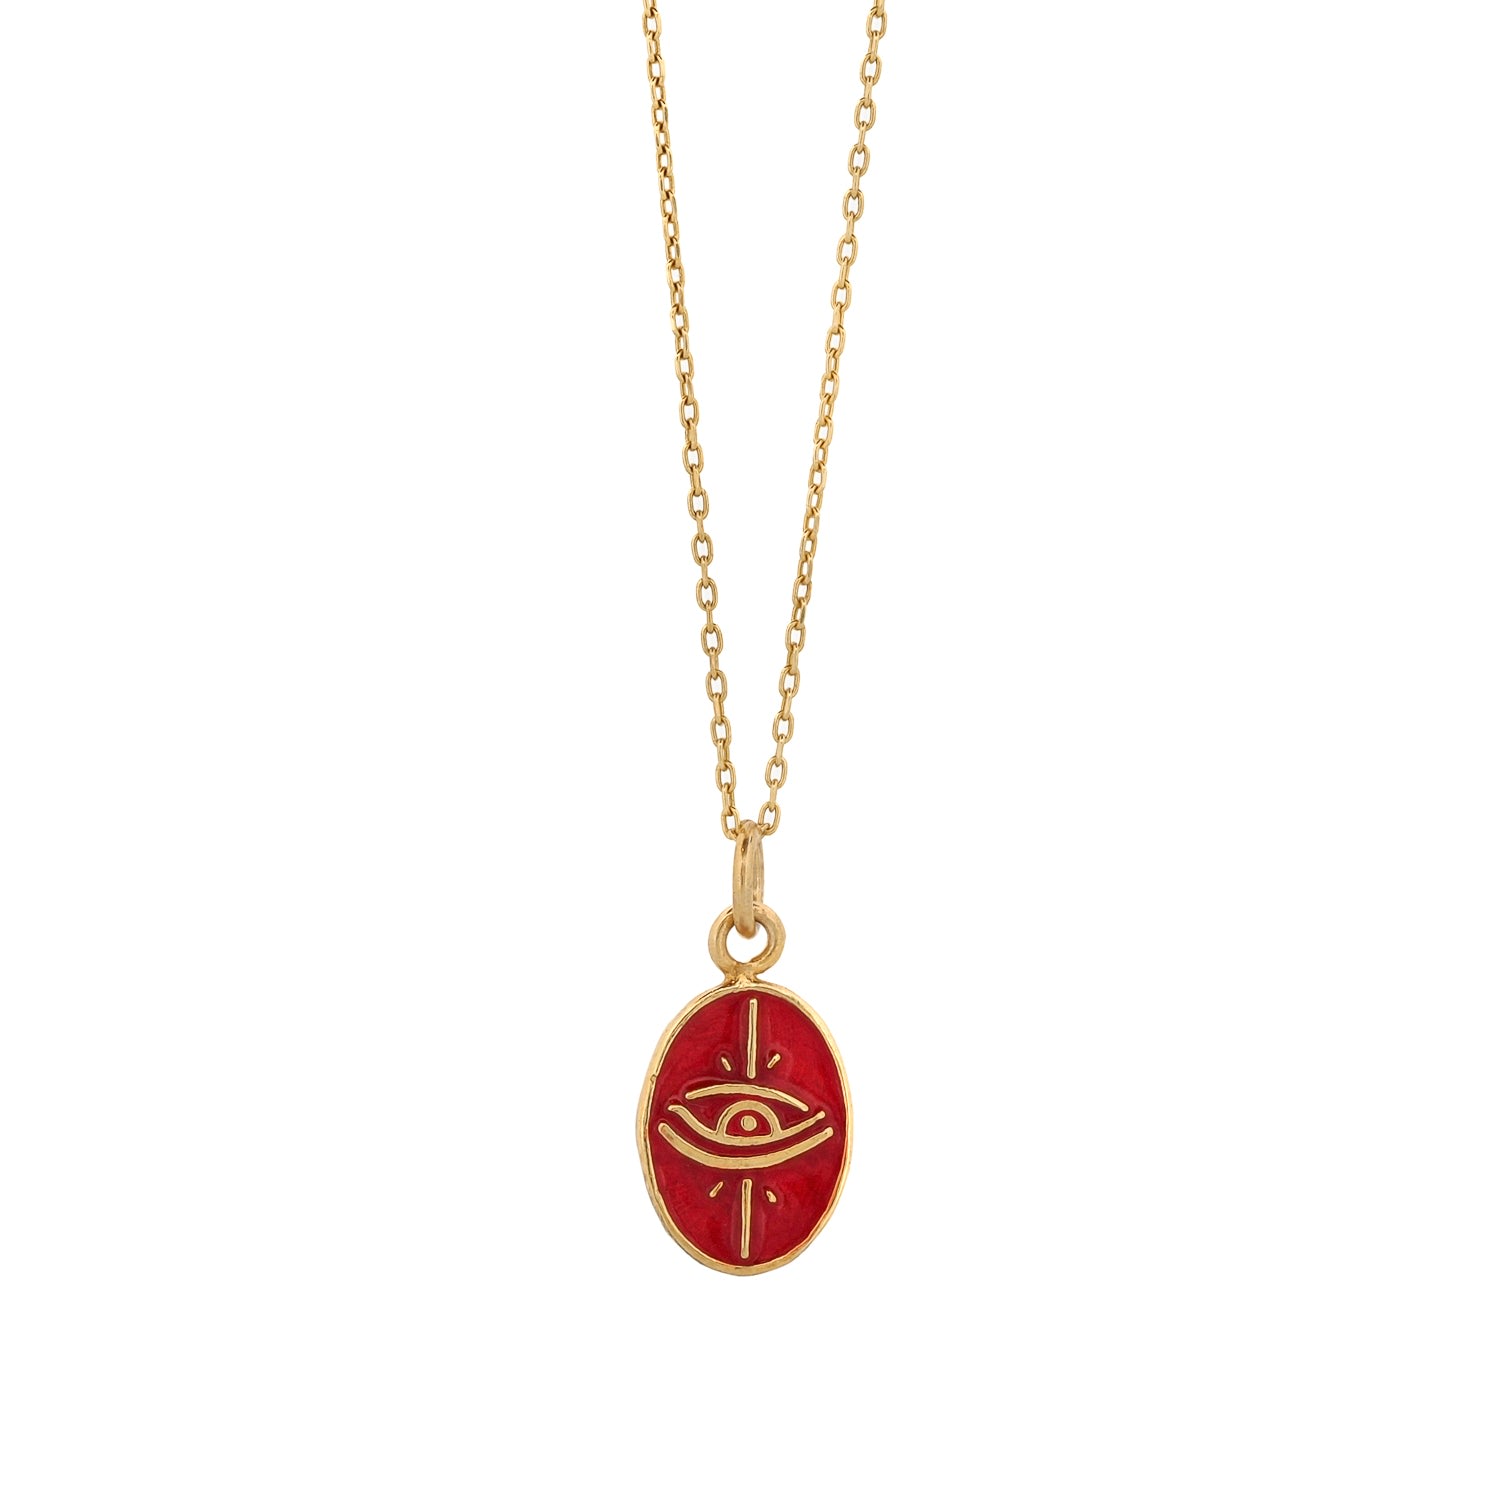 Ebru Jewelry Women's Gold / Red Red Enamel Evil Eye Minimalist Gold Protective Necklace - Red